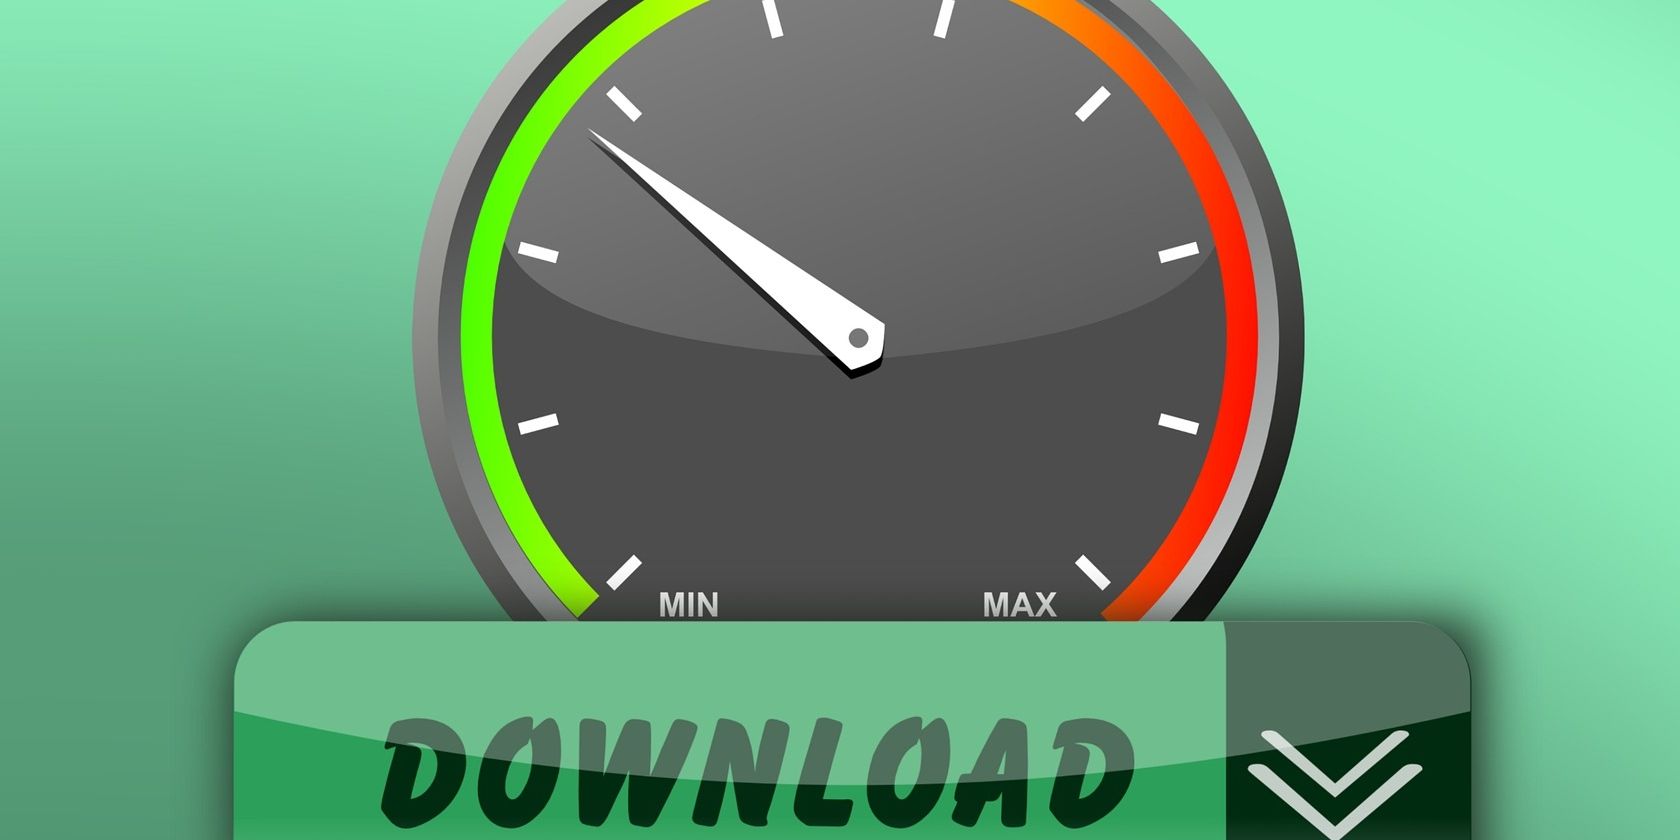 How to Tell If Your Internet is Being Throttled